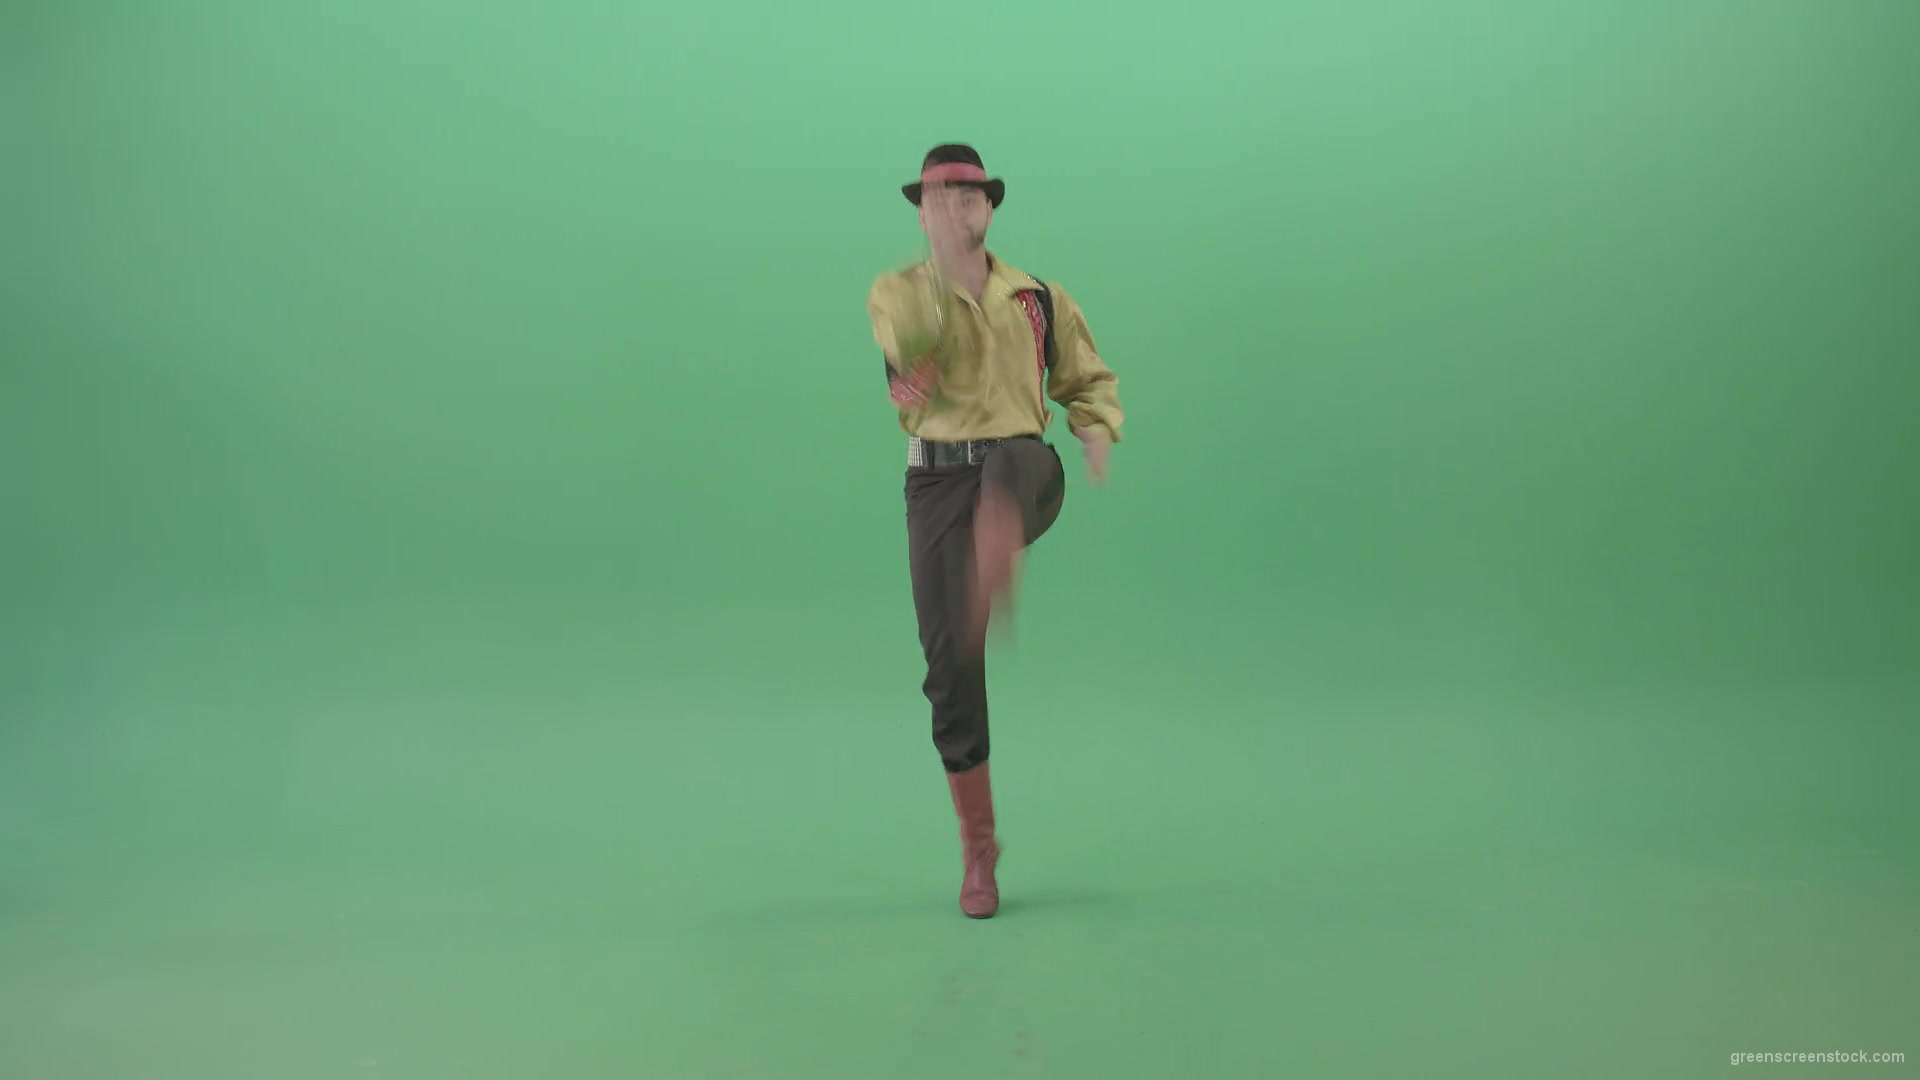 Funny-dancing-Gipsy-in-Moldova-jumping-isolated-on-Green-Screen-4K-Video-Footage-1920_002 Green Screen Stock